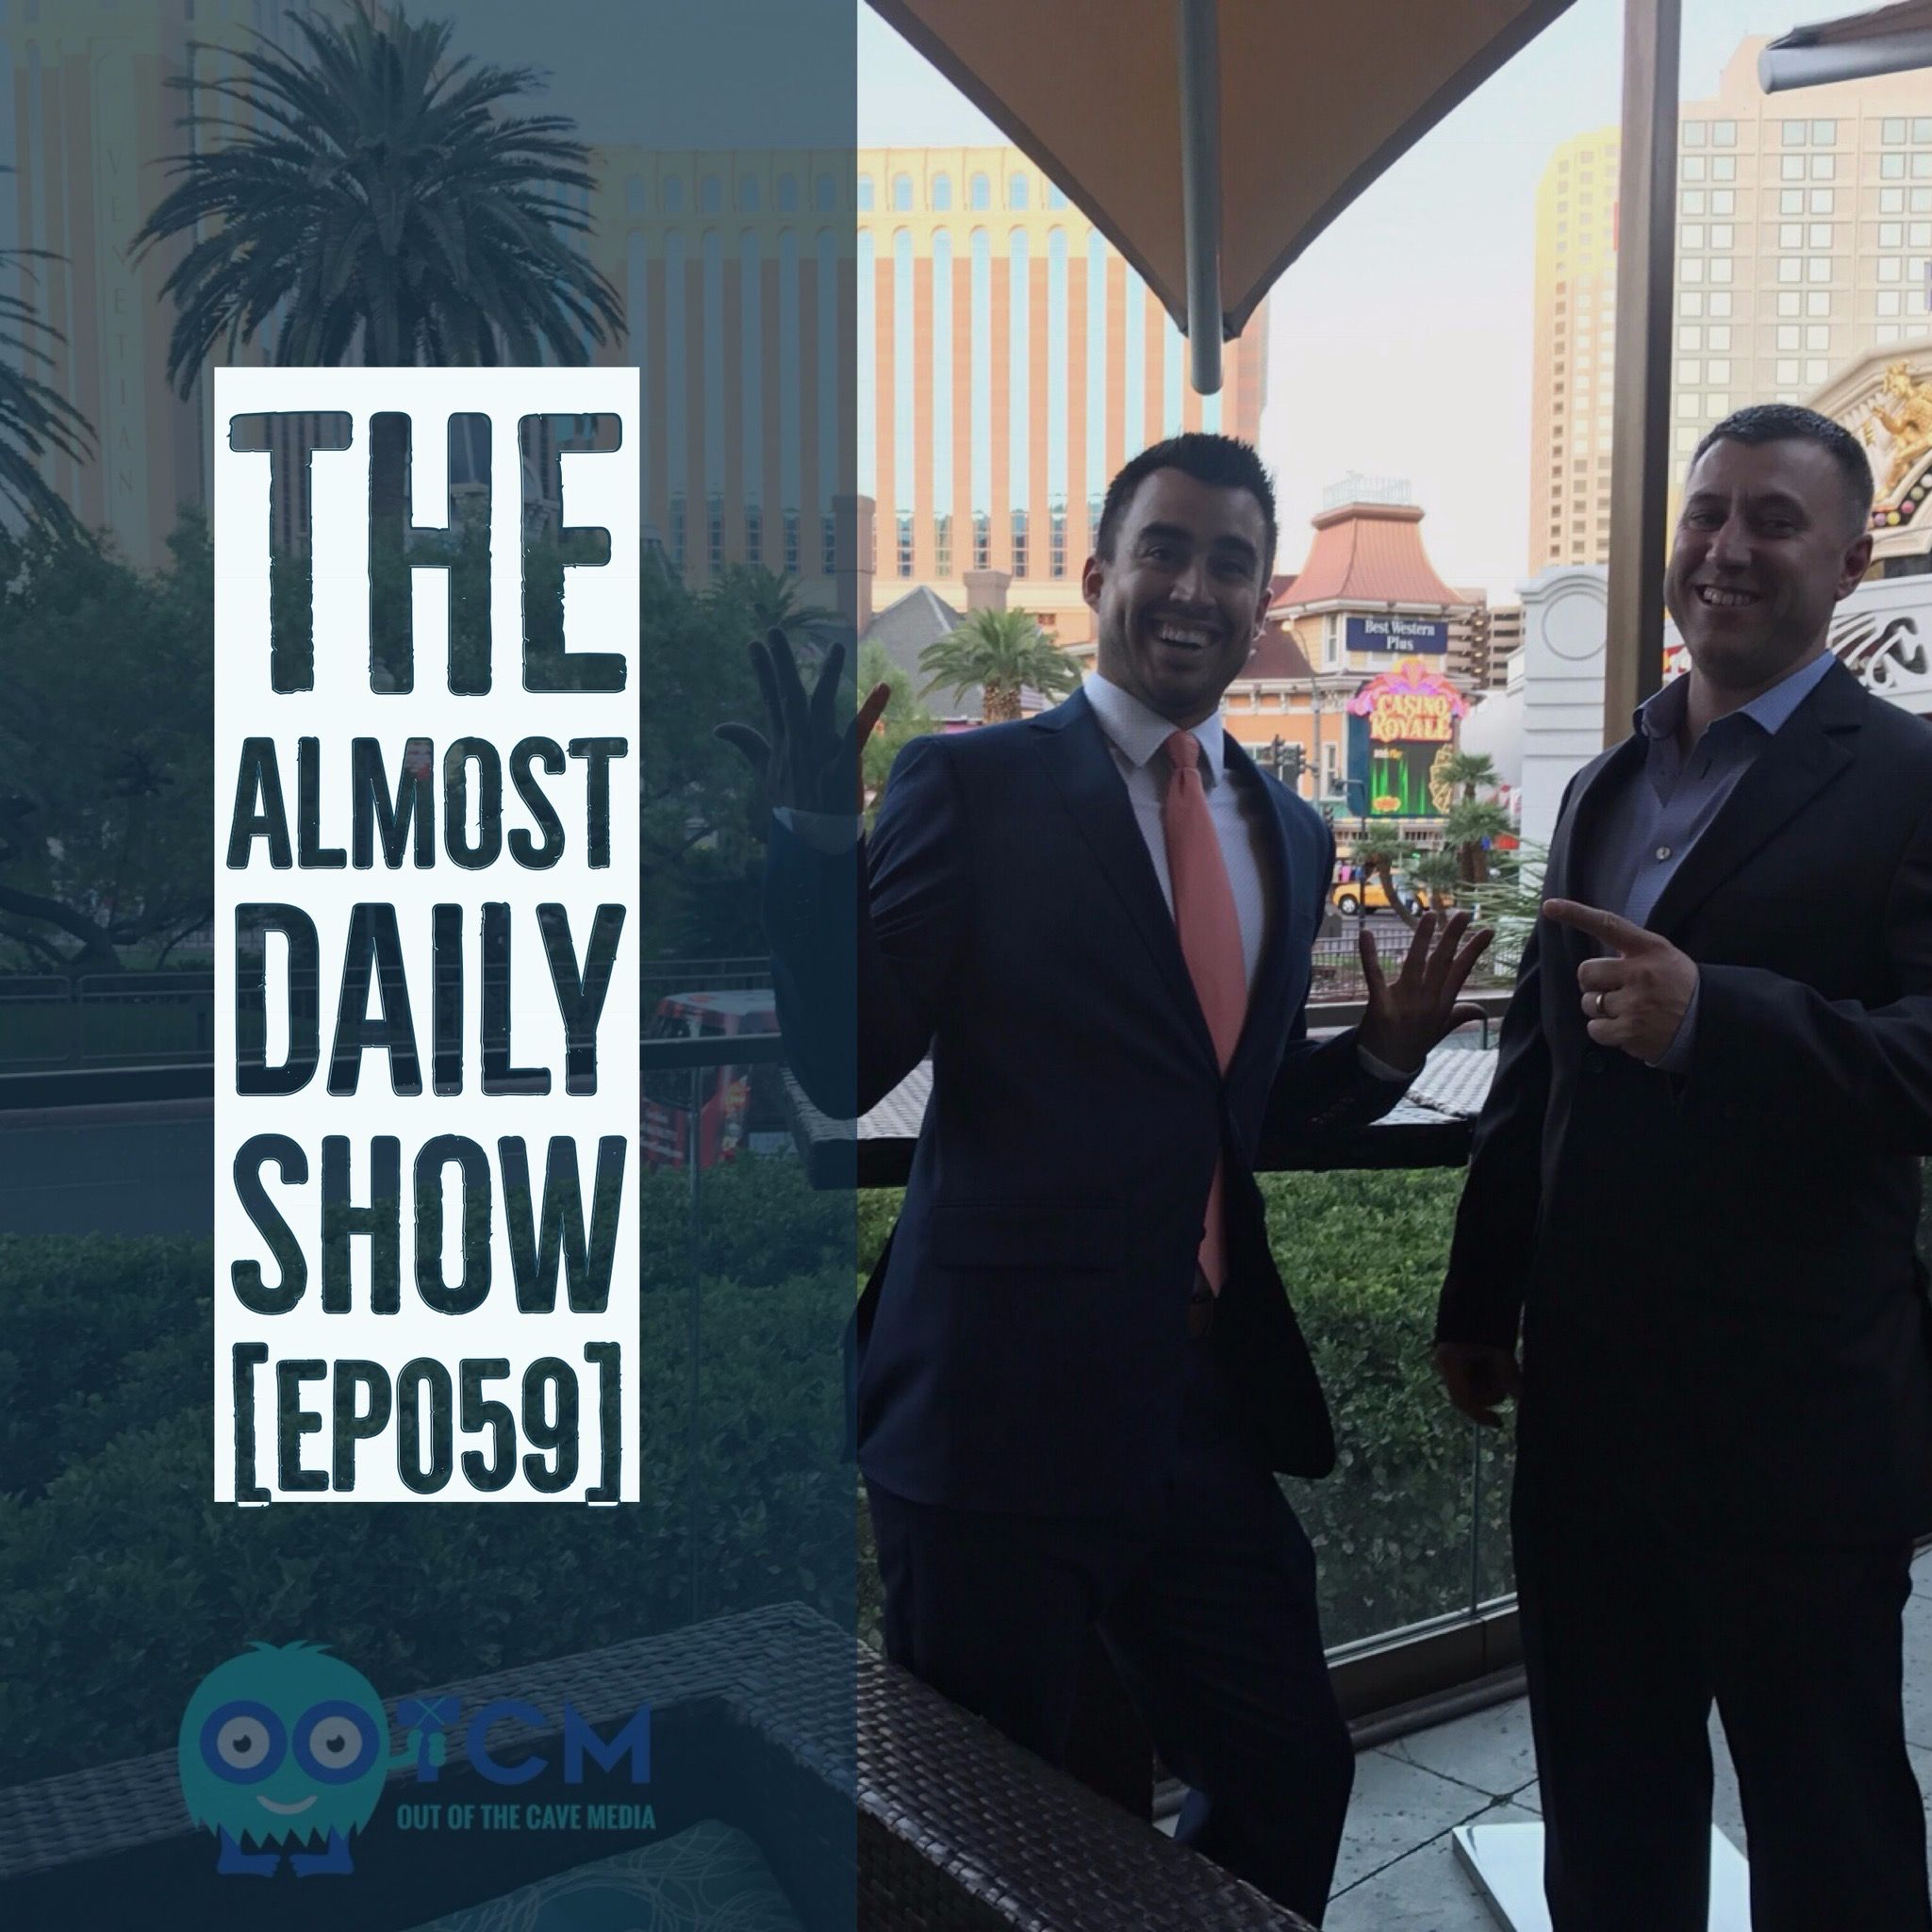 The Roller Coaster of Success and Failure | The Almost Daily Show Ep 059